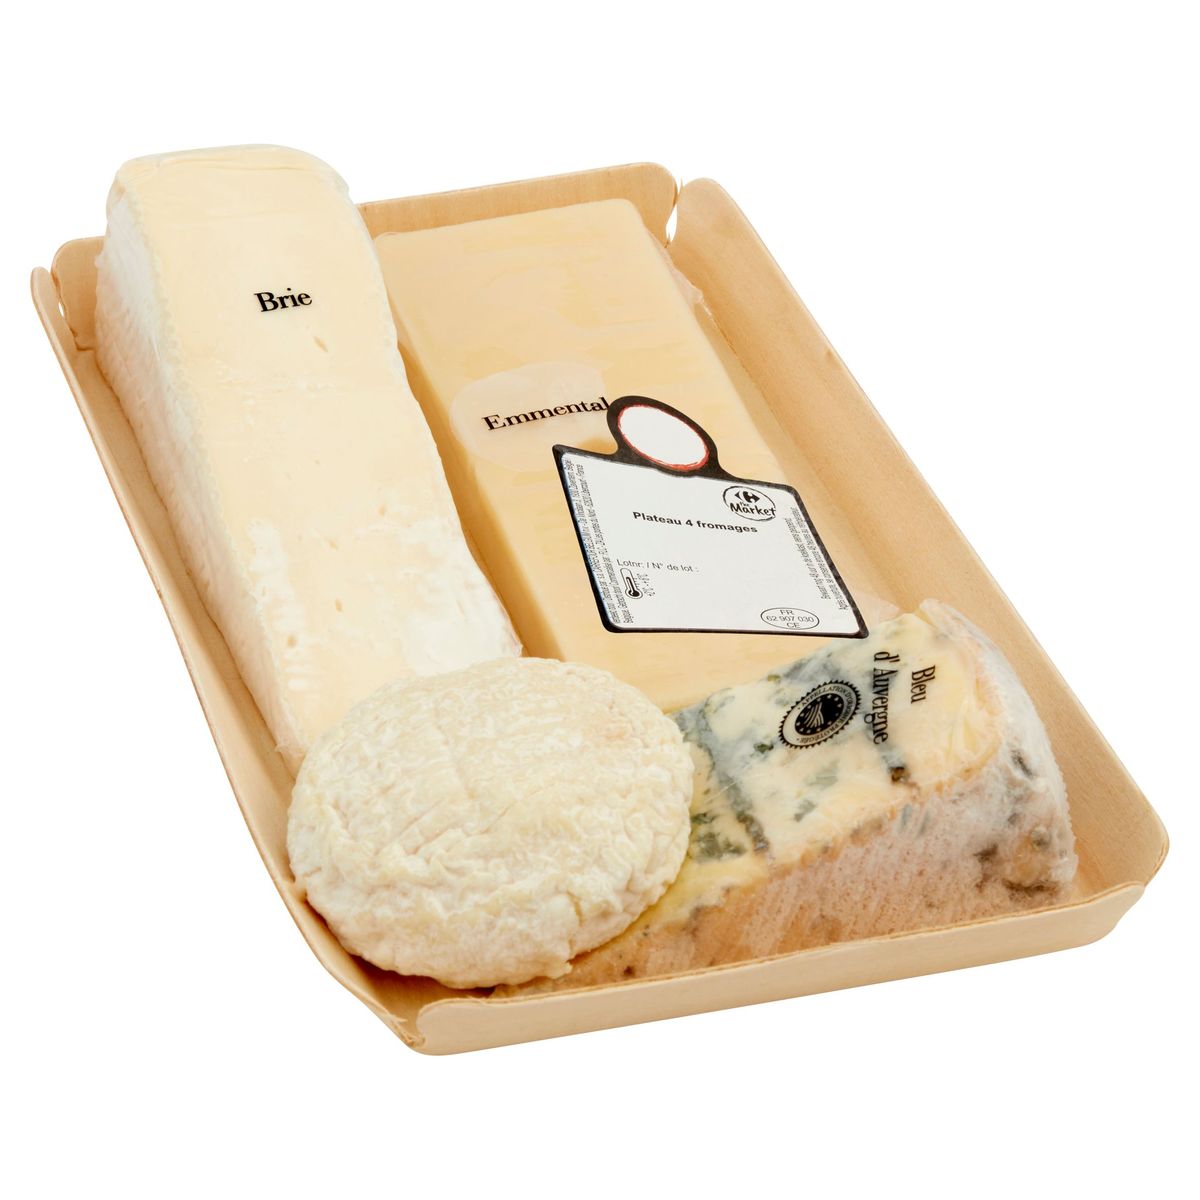 Carrefour The Market Plateau 4 Fromages 420 g